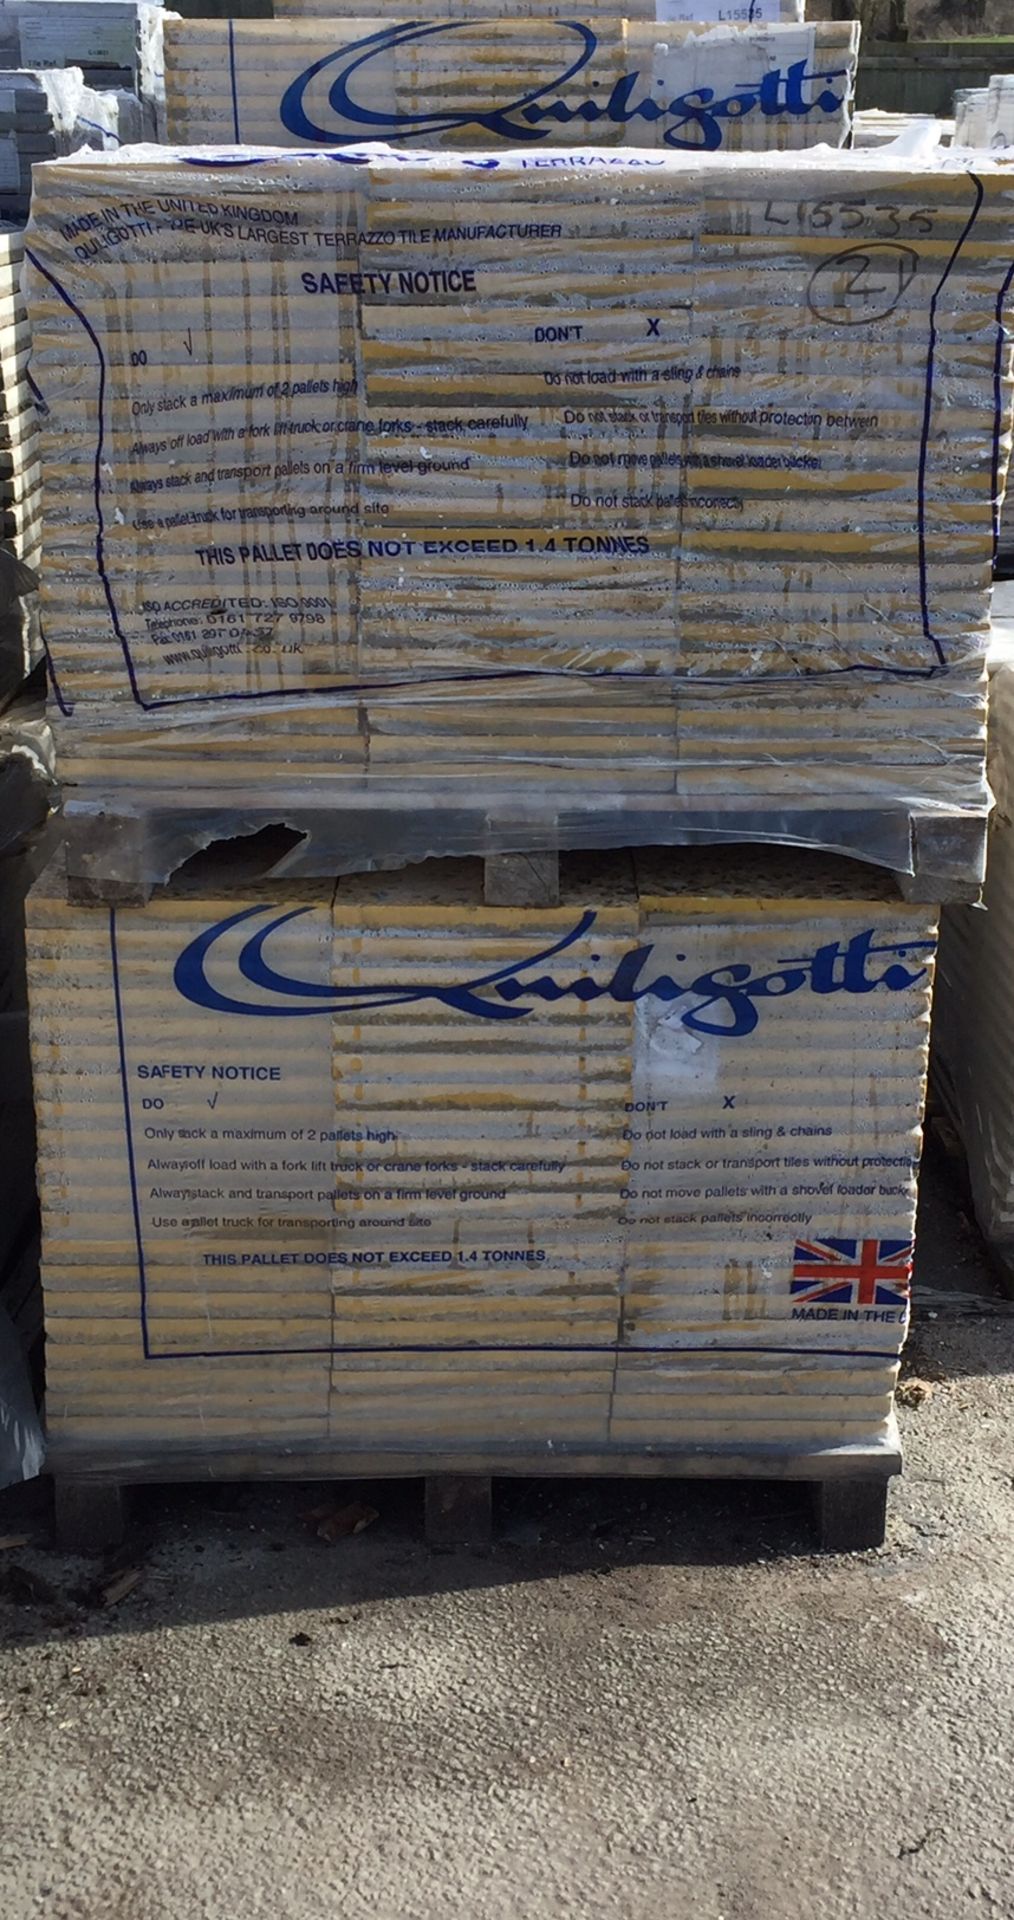 1 x Pallet (20 sq yards) of Brand New Quiligotti Terrazzo Commercial Floor Tiles (ref L15535) - Image 3 of 3